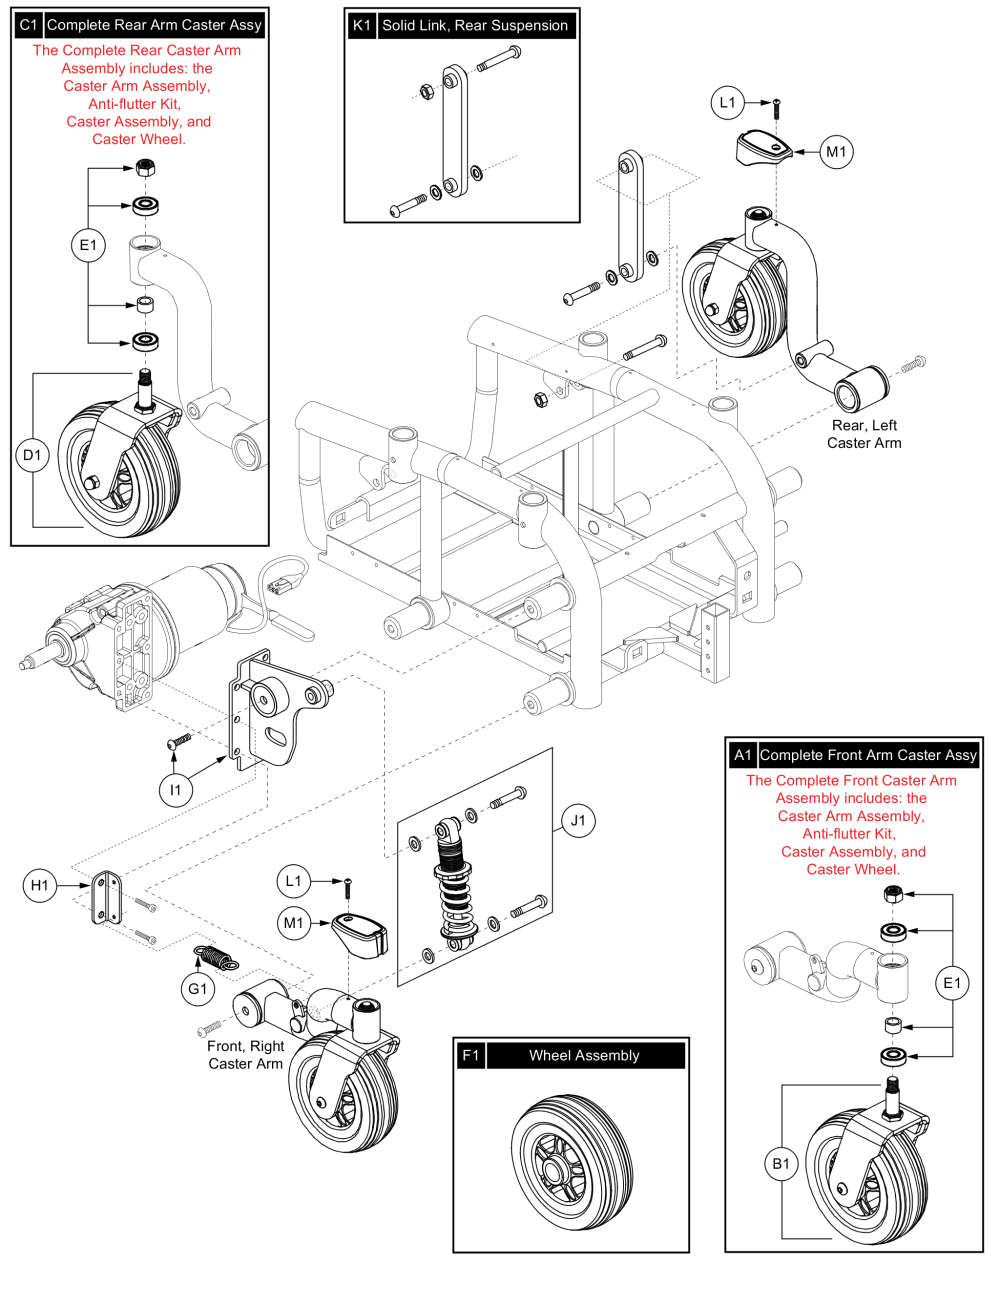 Caster Assy - Right Front, Left Rear, Jazzy 614 Hd parts diagram